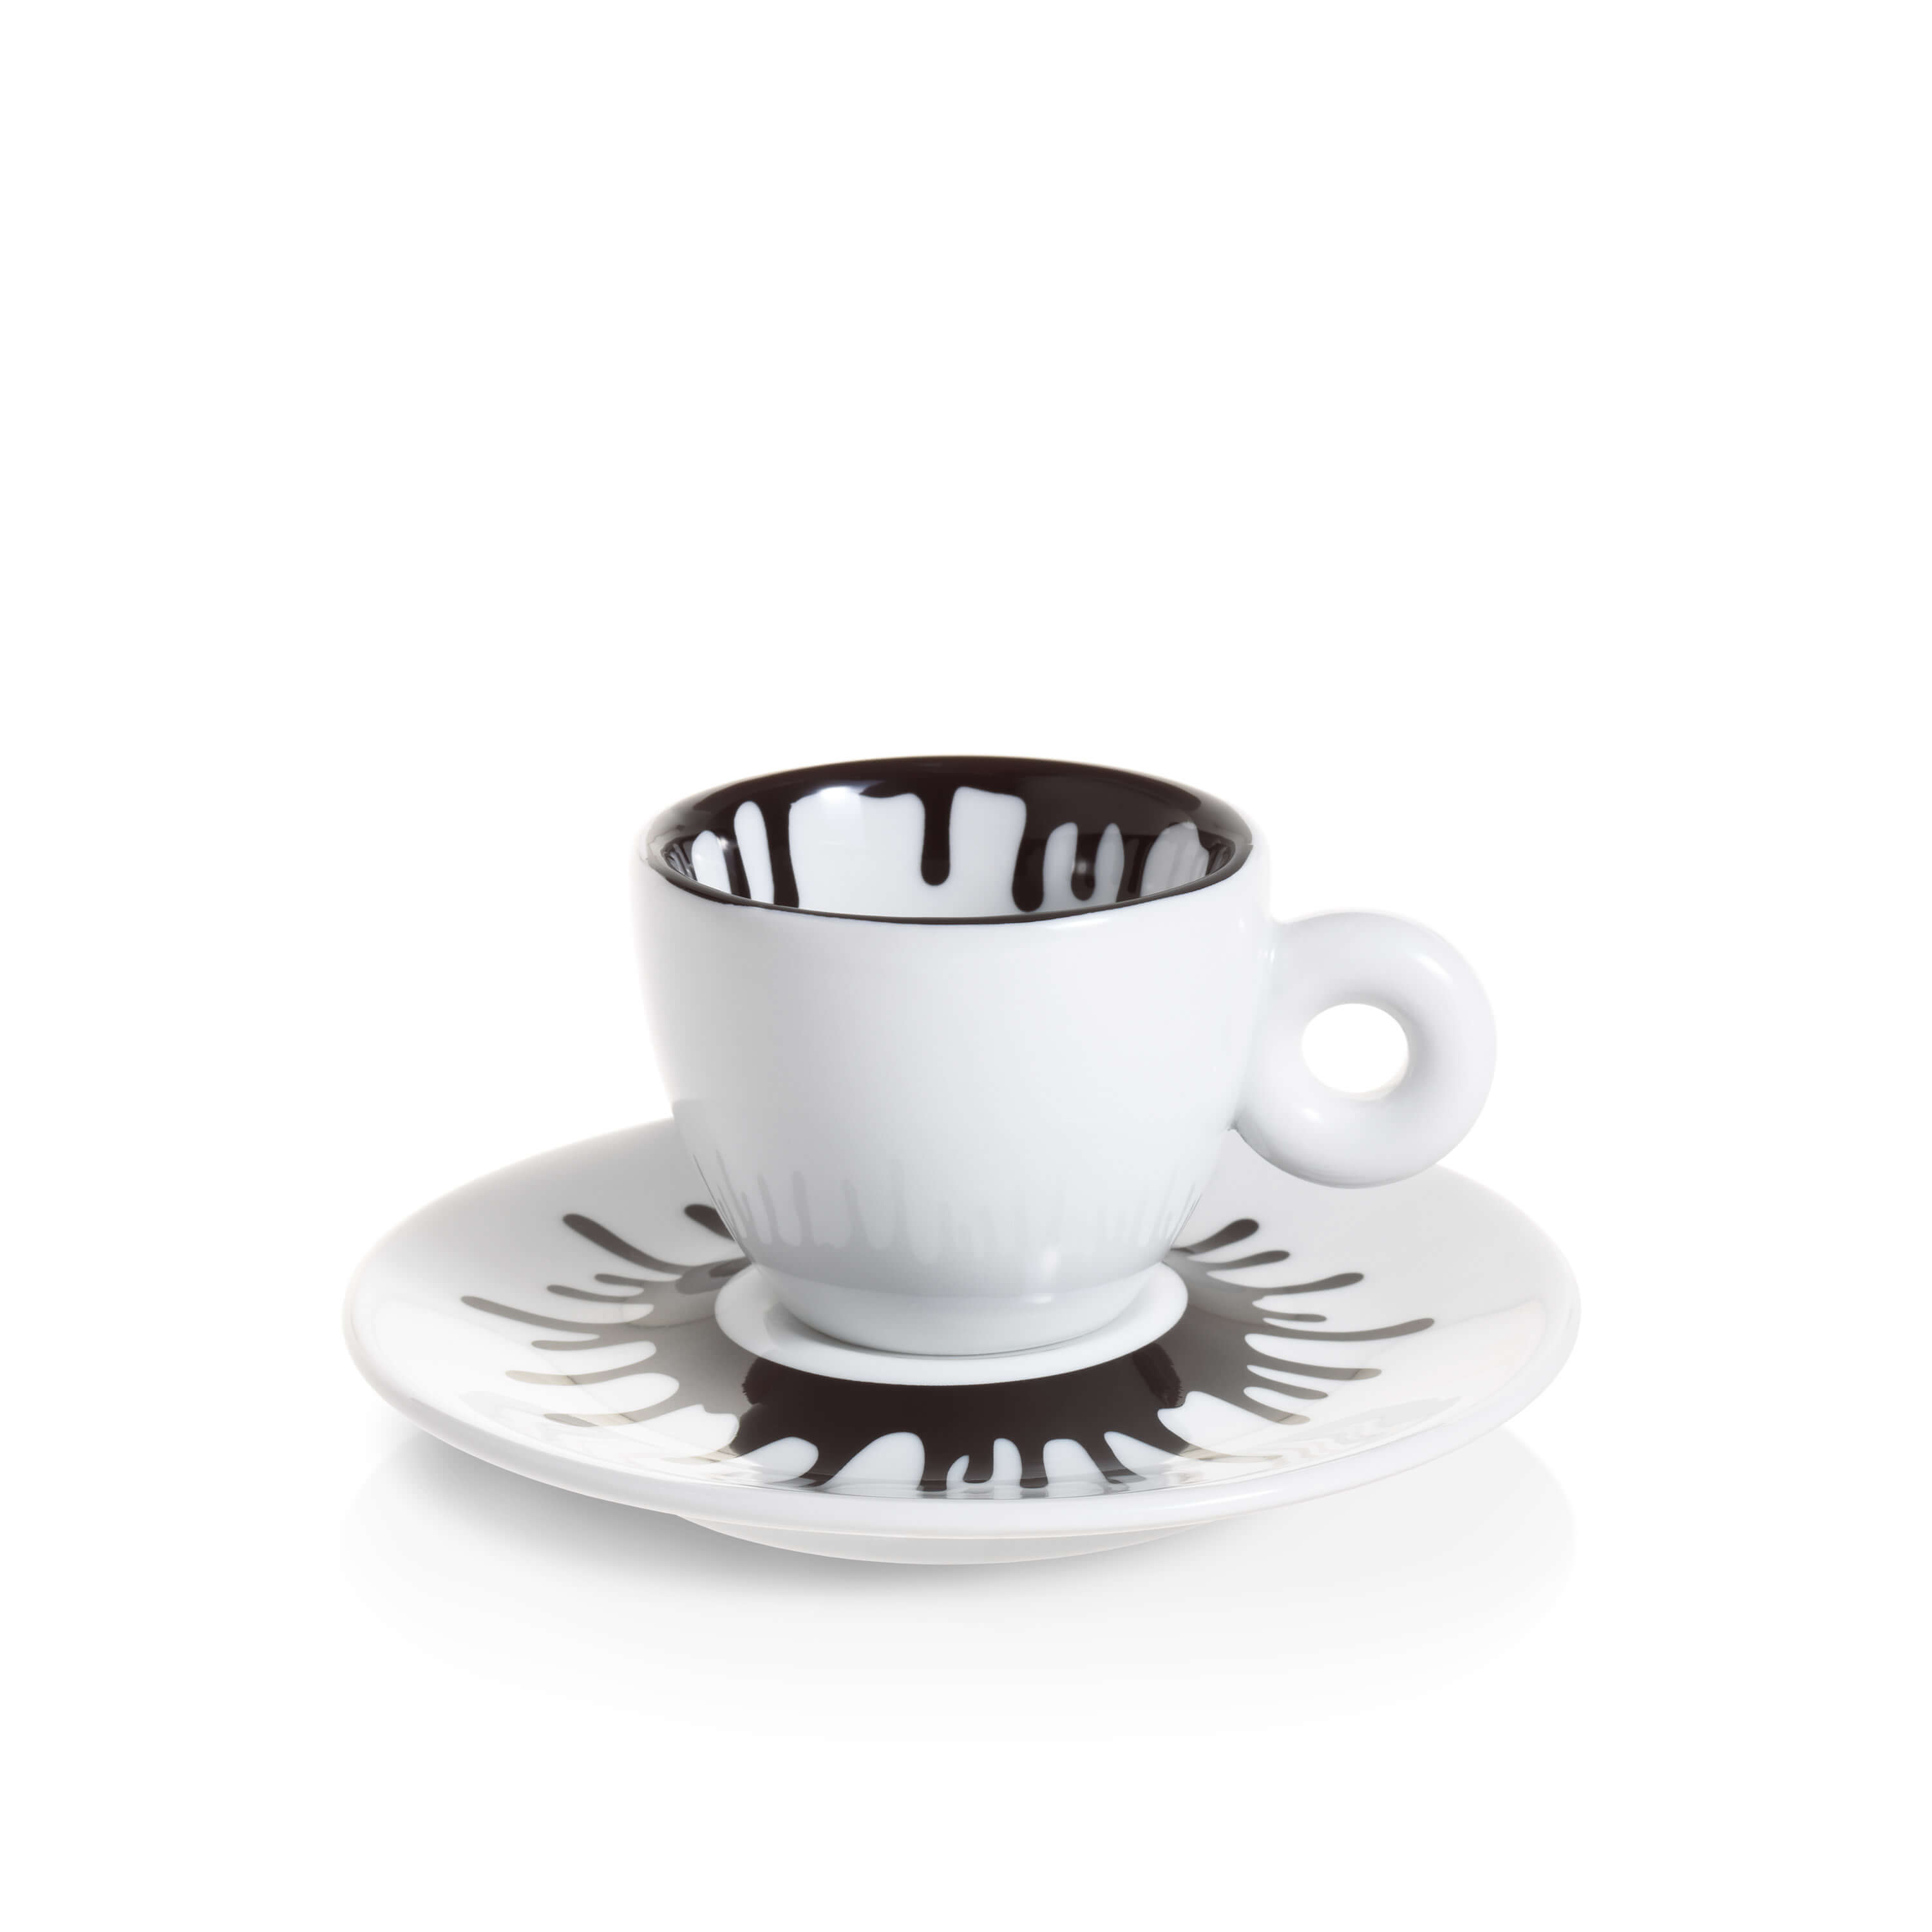 illy Art Collection ΑΙ WEIWEI Gift Set 2 Espresso Cups, Cups, 02-02-6070